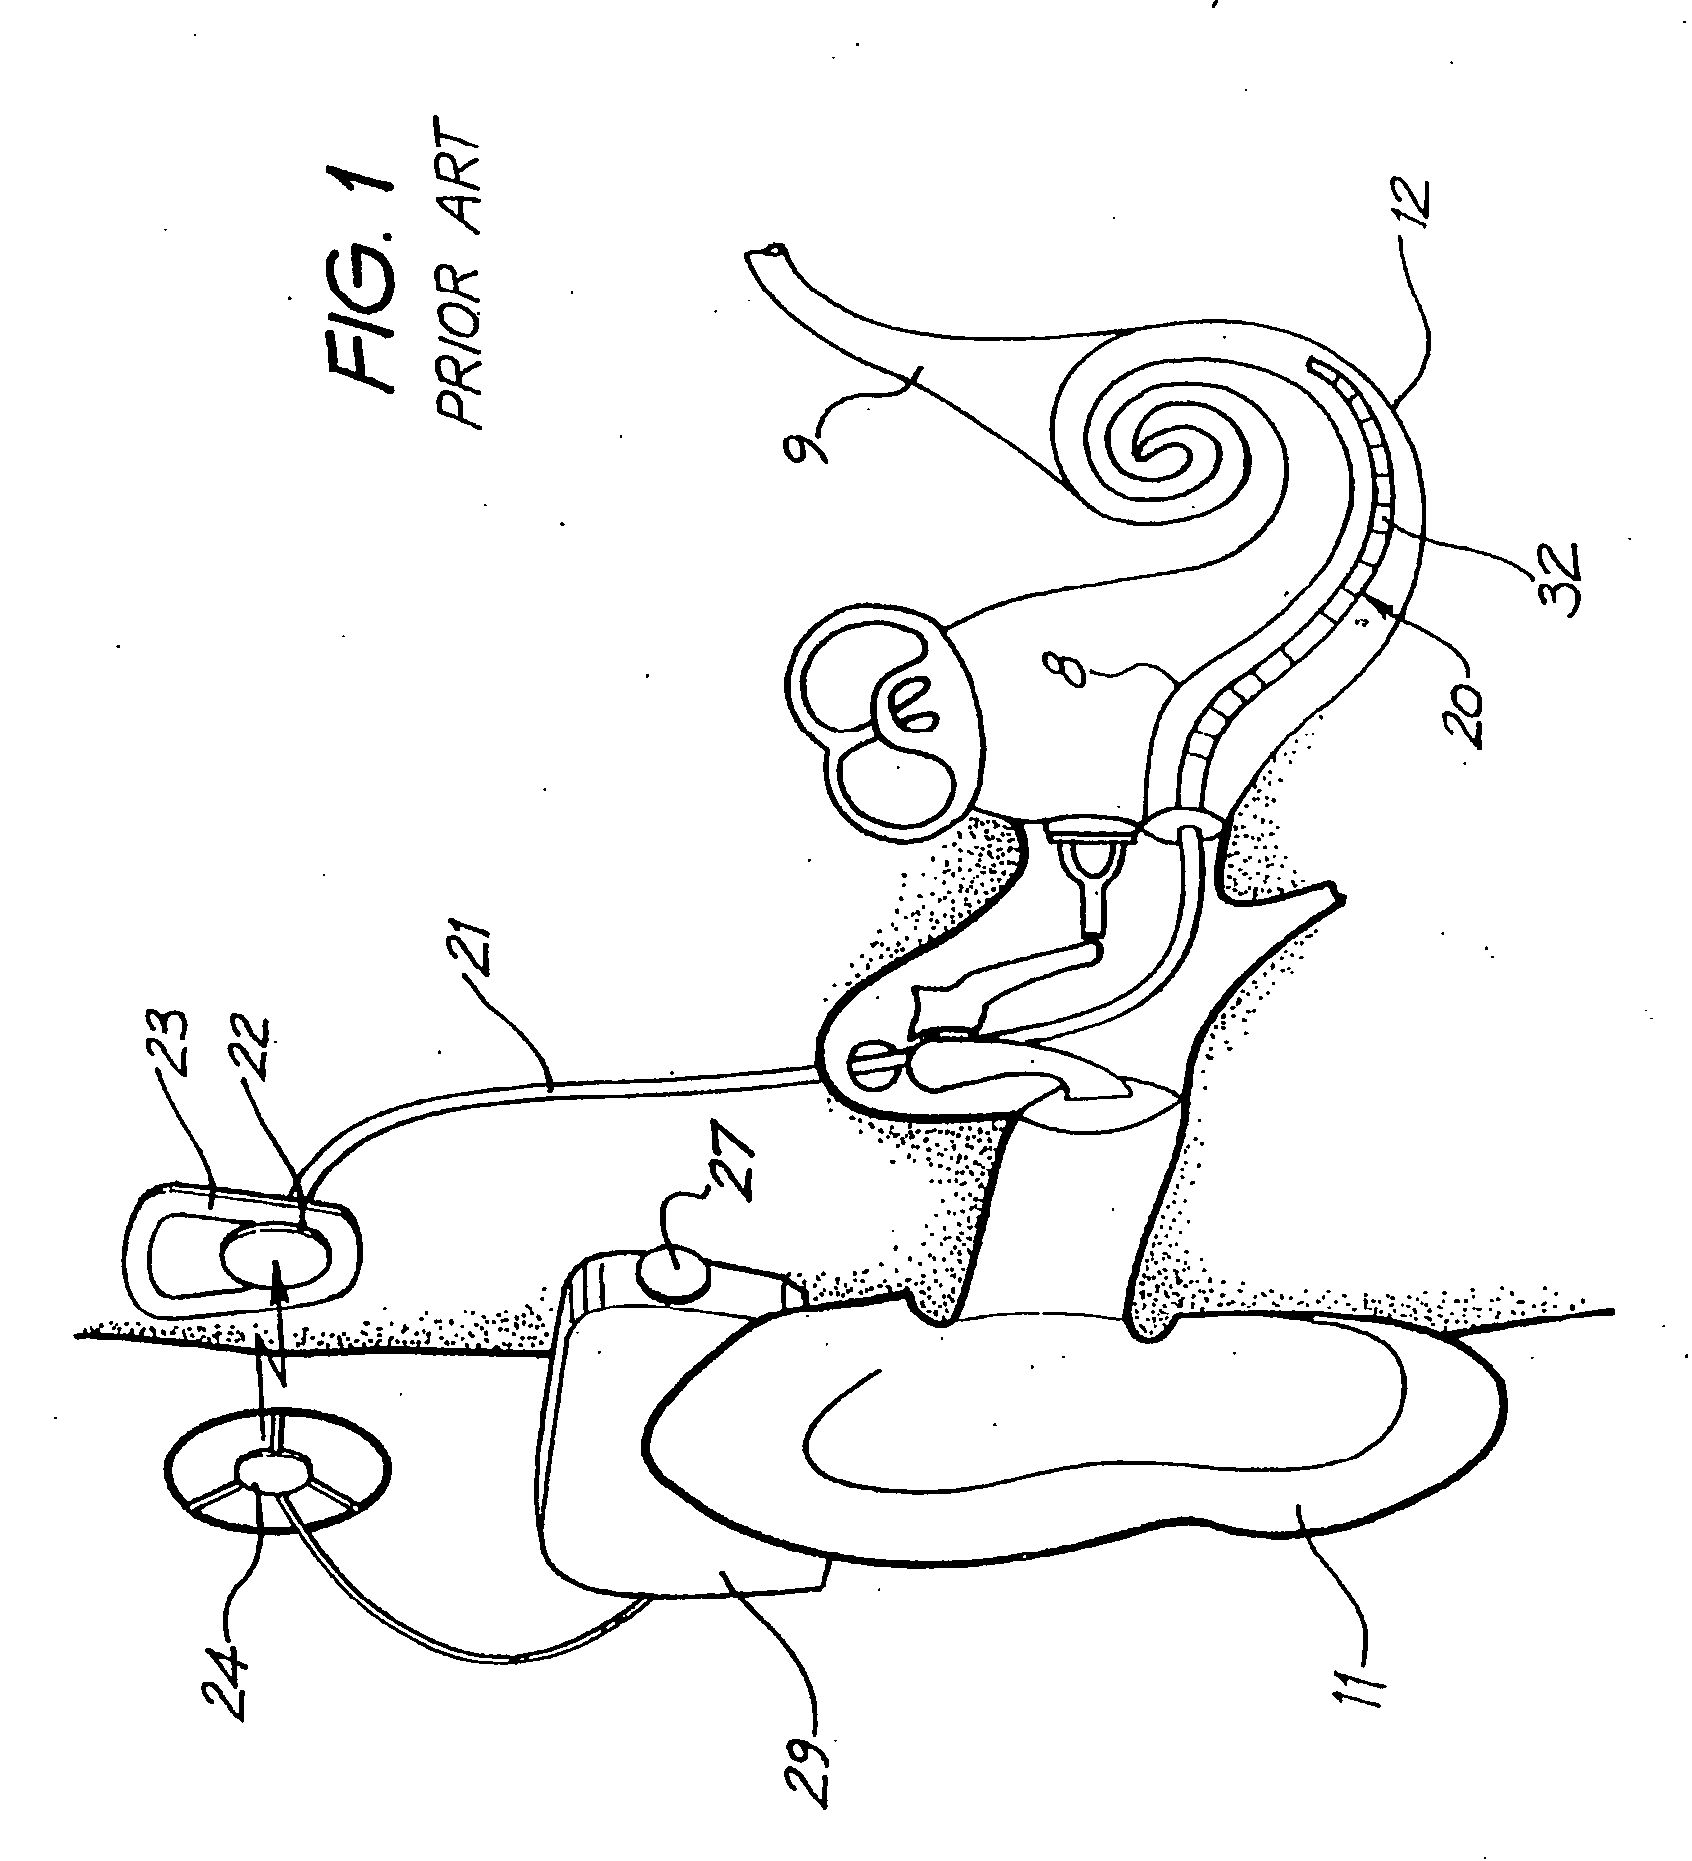 Cochlear implant drug delivery device